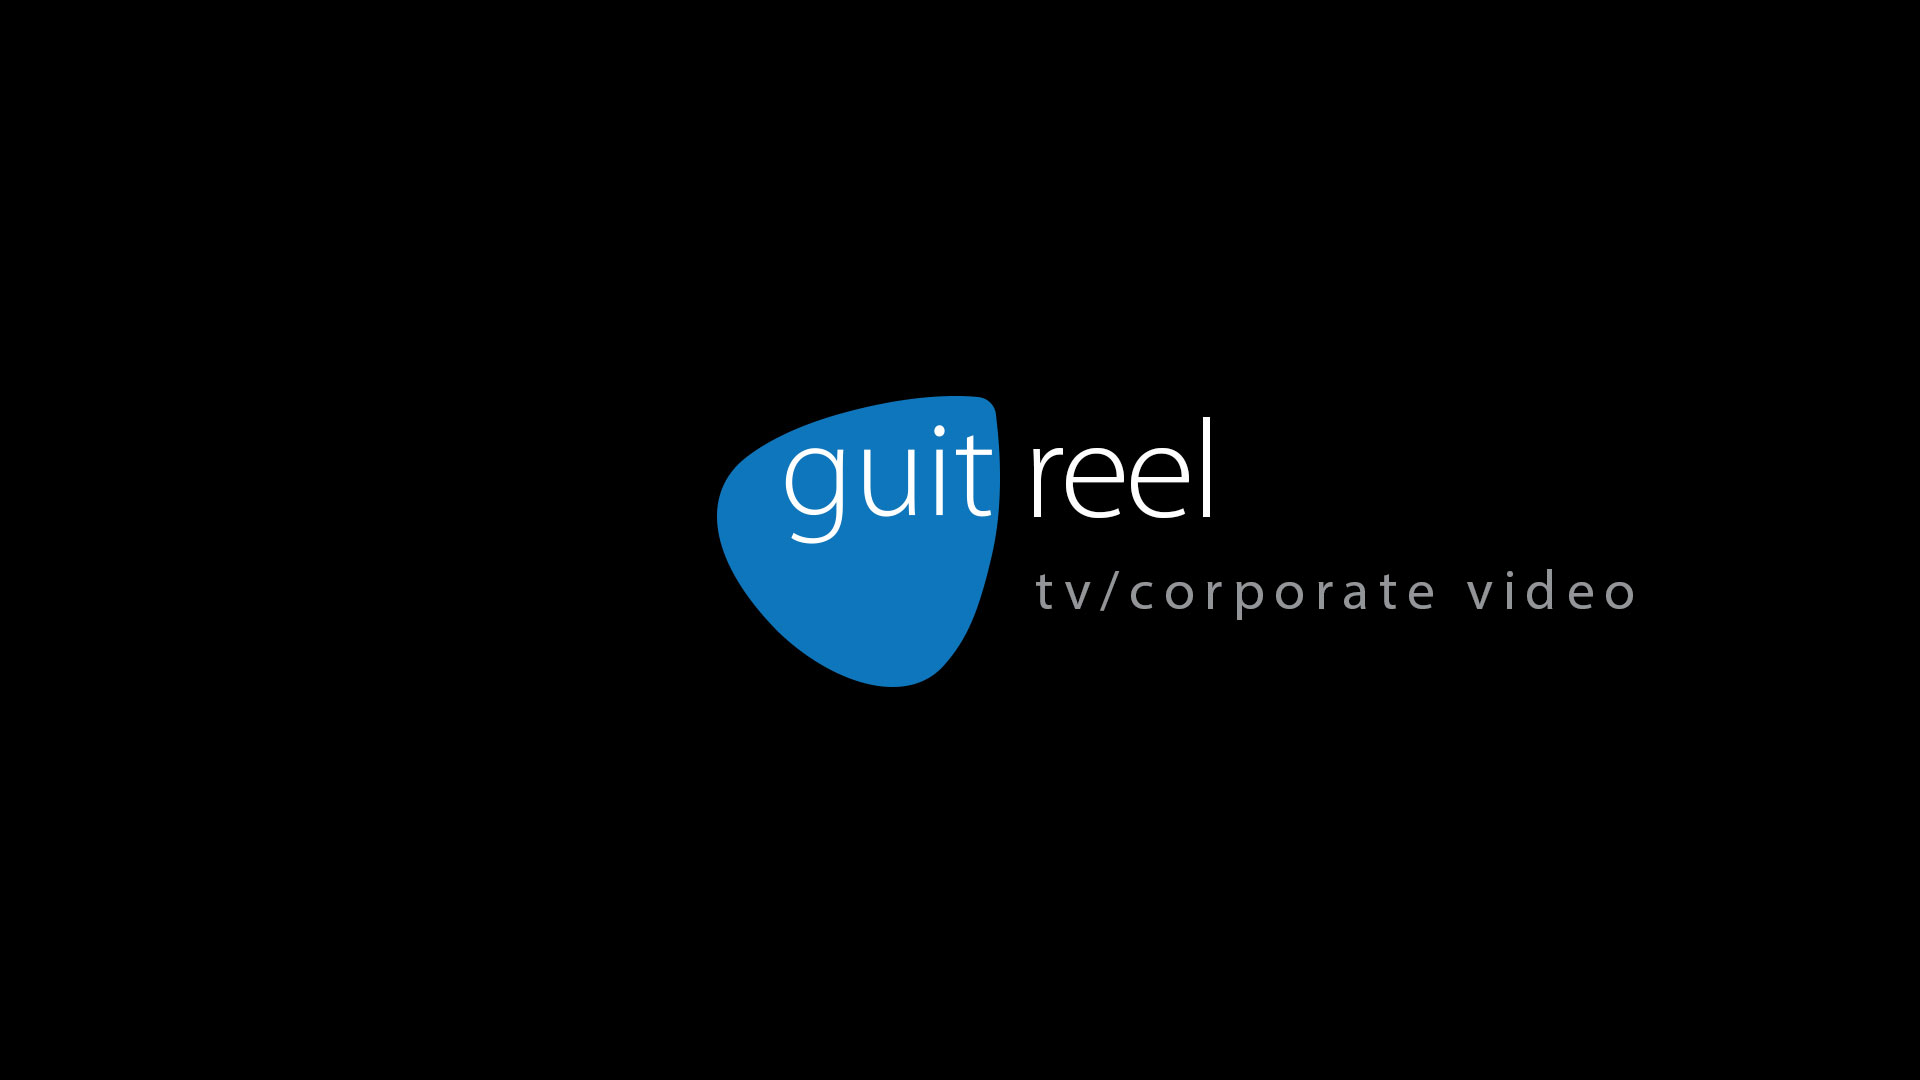 A black background with the words guit reel written in blue.